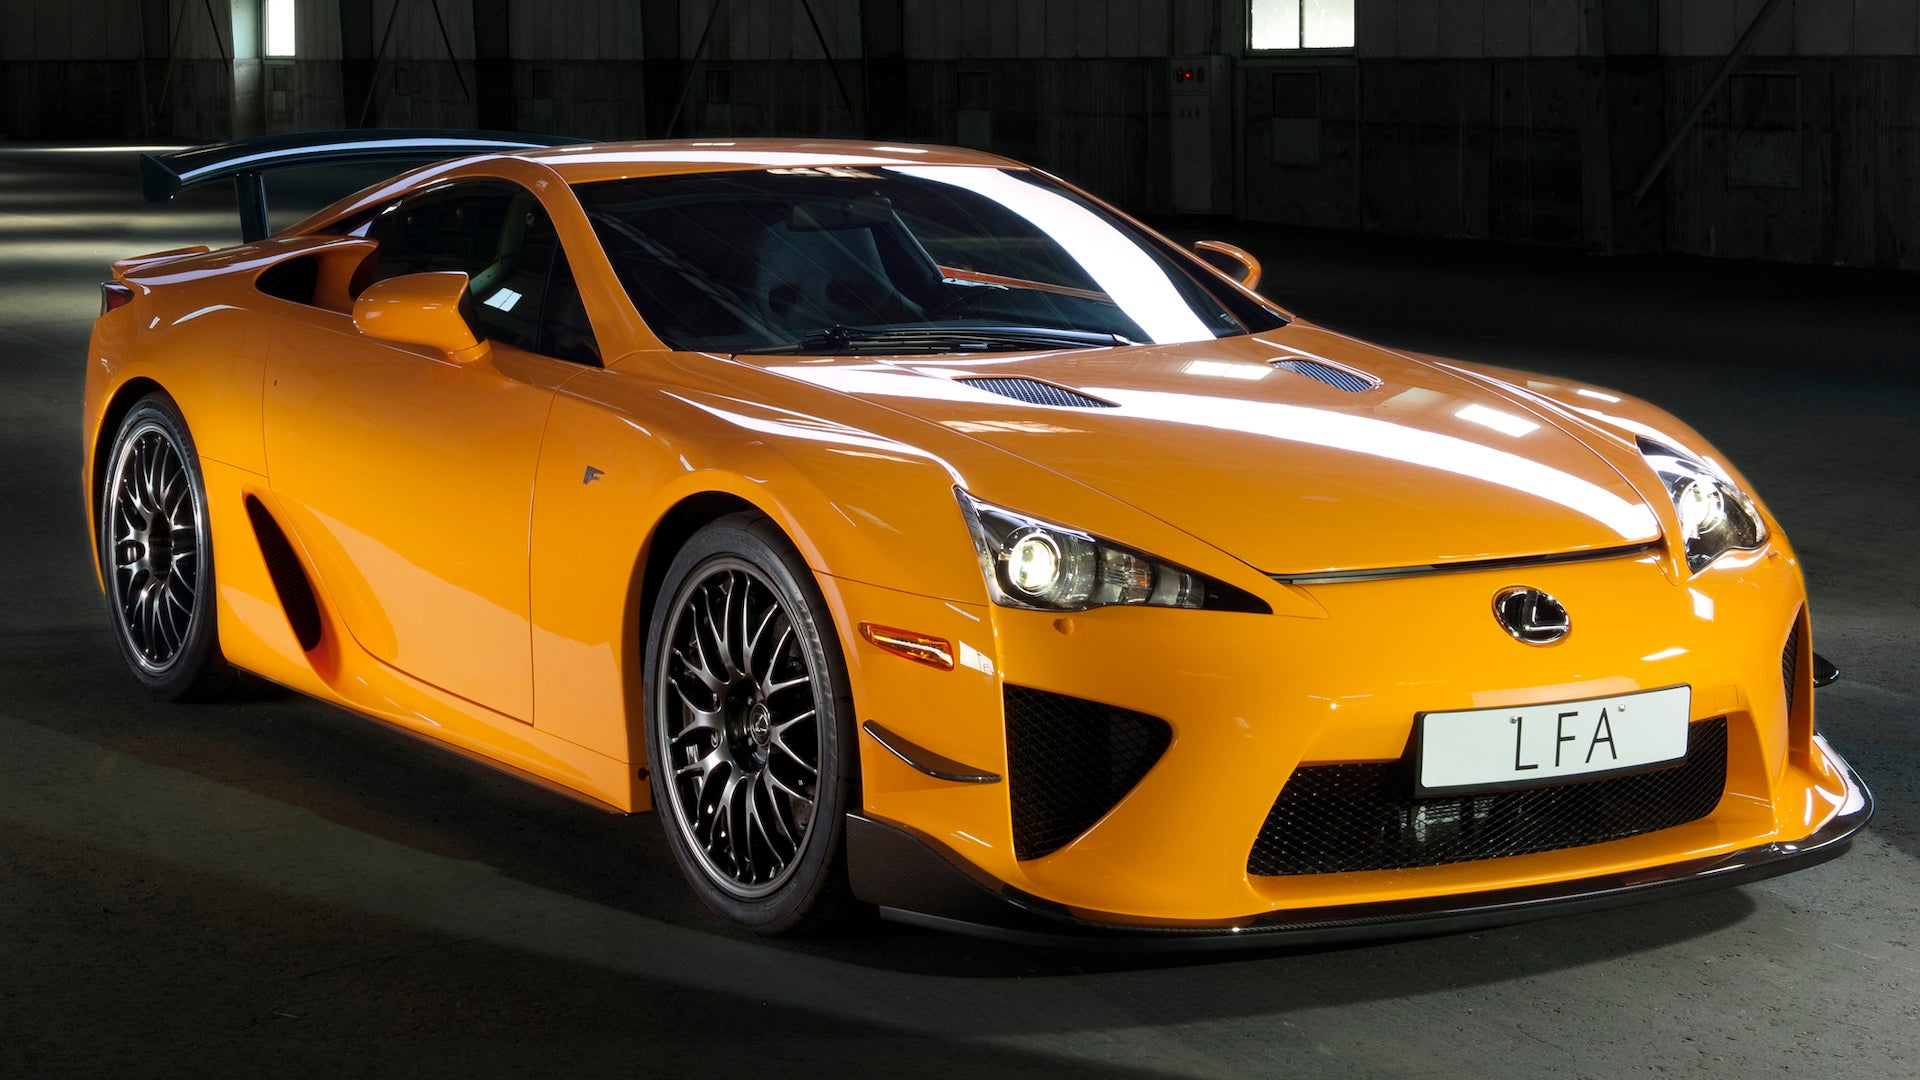 The Lexus LFA’s Successor Could Be Called the LFR, Trademarks Suggest